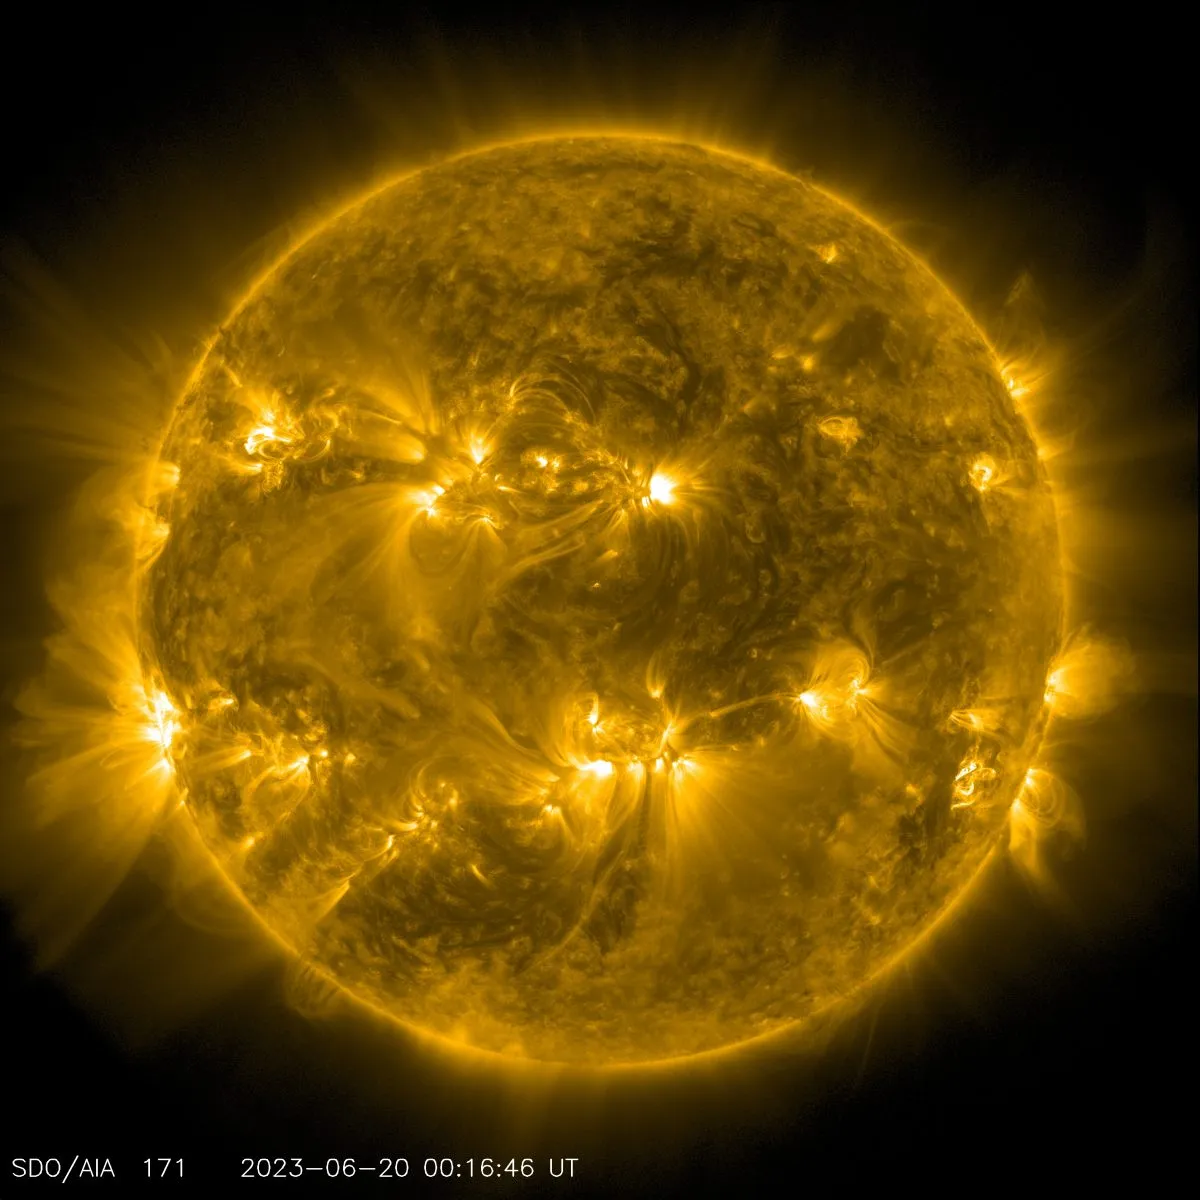 Solar flares erupted from the Sun on 20 June. Credit: SDO/AIA